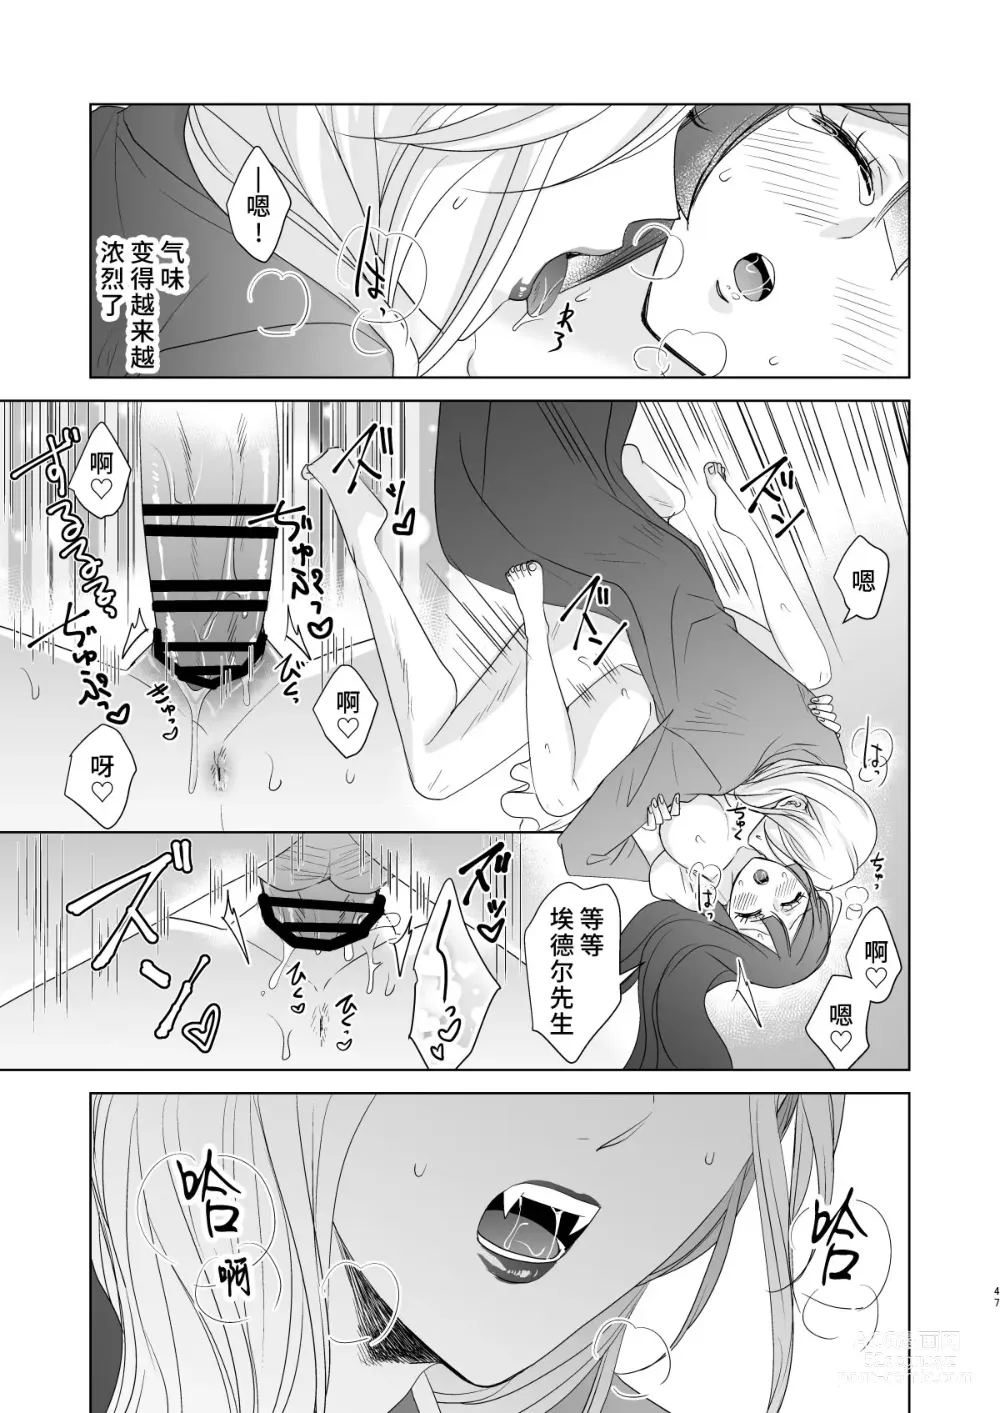 Page 46 of doujinshi 男大姐♂吸血鬼和少女